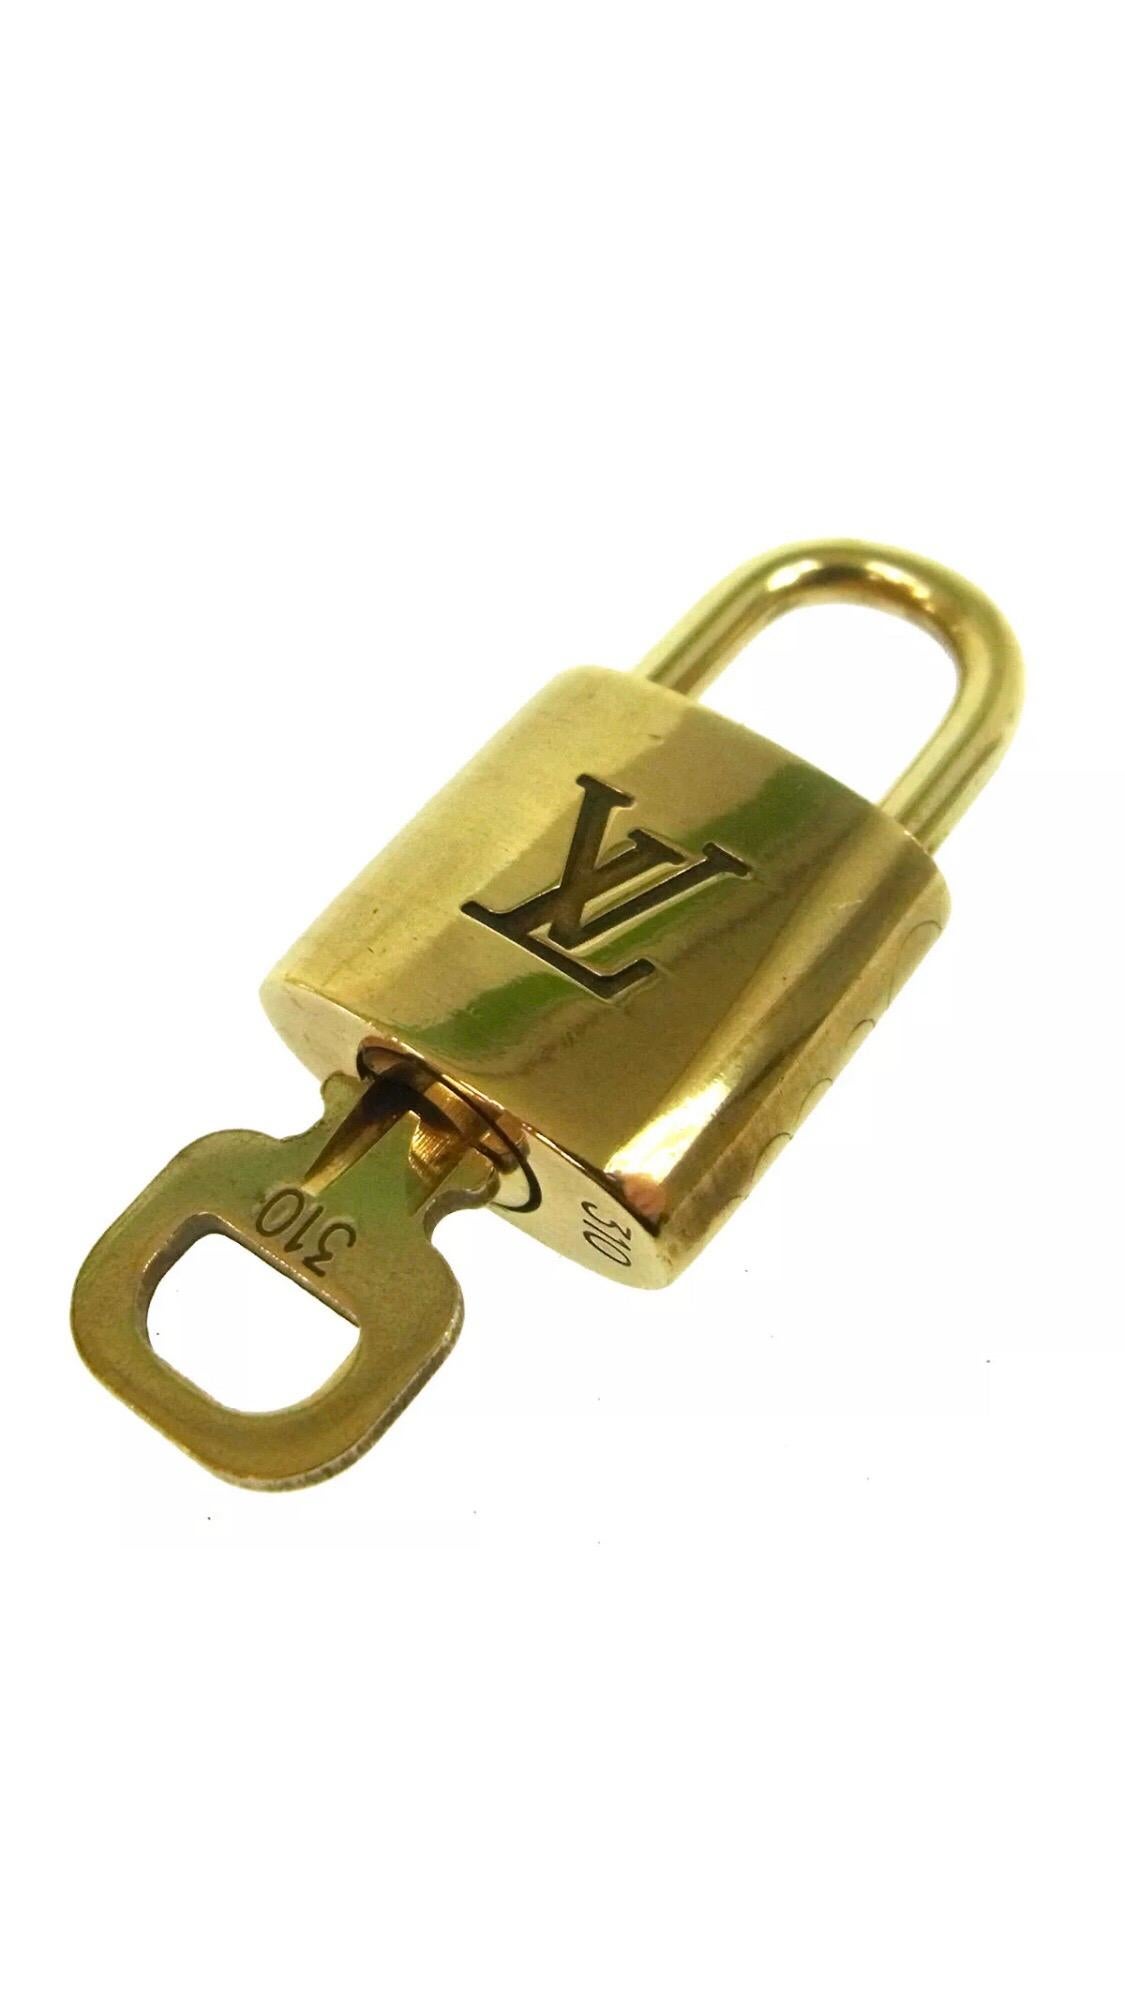 Louis Vuitton Gold Logo Travel Cosmetic Handbag Duffle Vanity Padlock and Key

Brass
Gold tone
Made in France
Measures 0.75” W x 1.5” H
Includes one padlock and one key
Actual padlock number and key may differ from shown